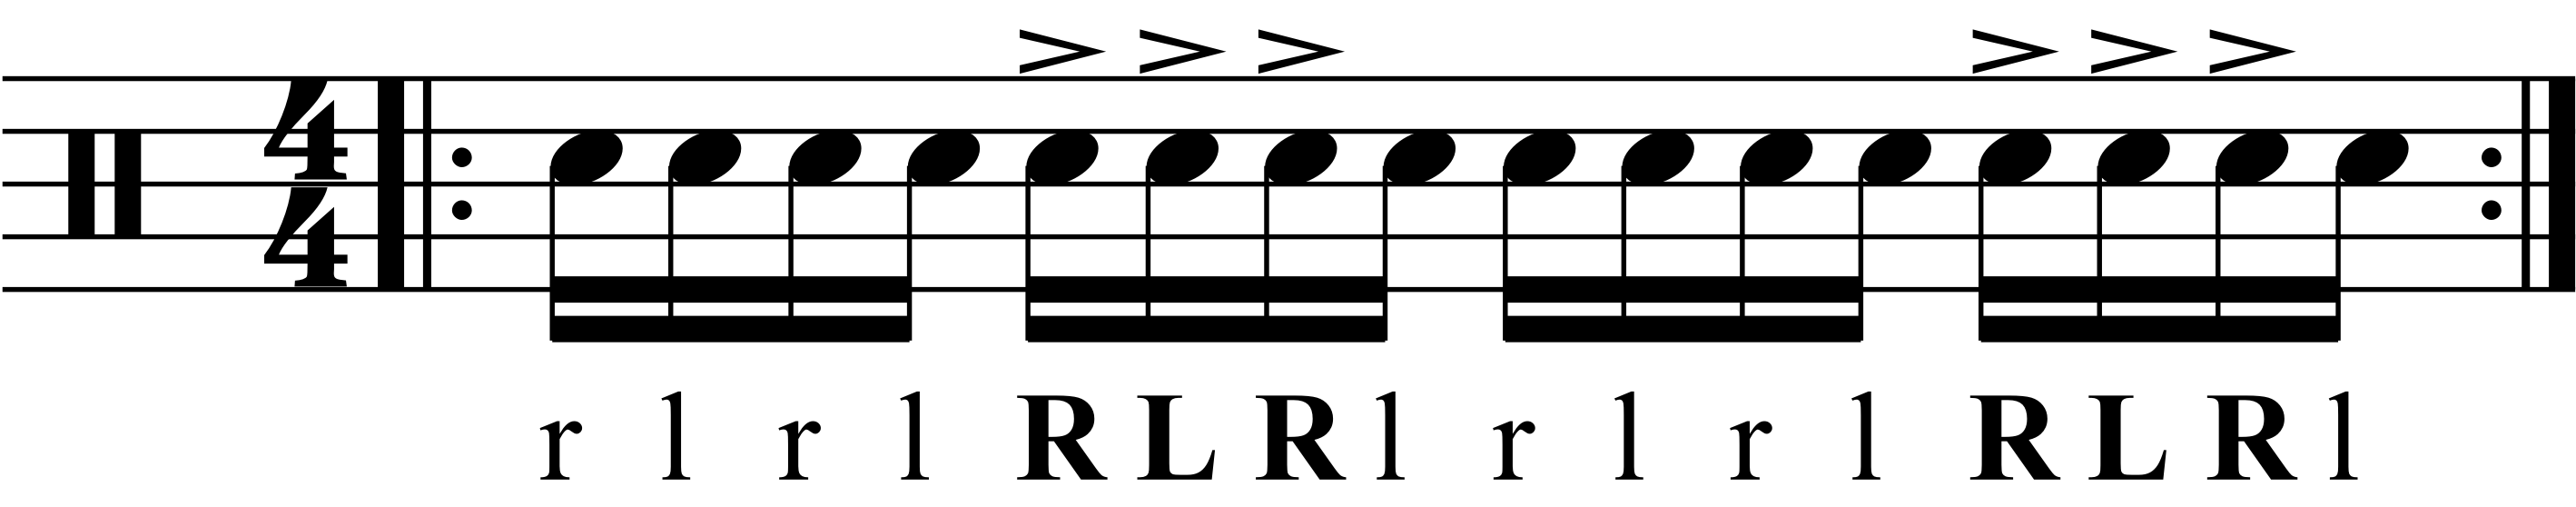 A rudiment exercise.